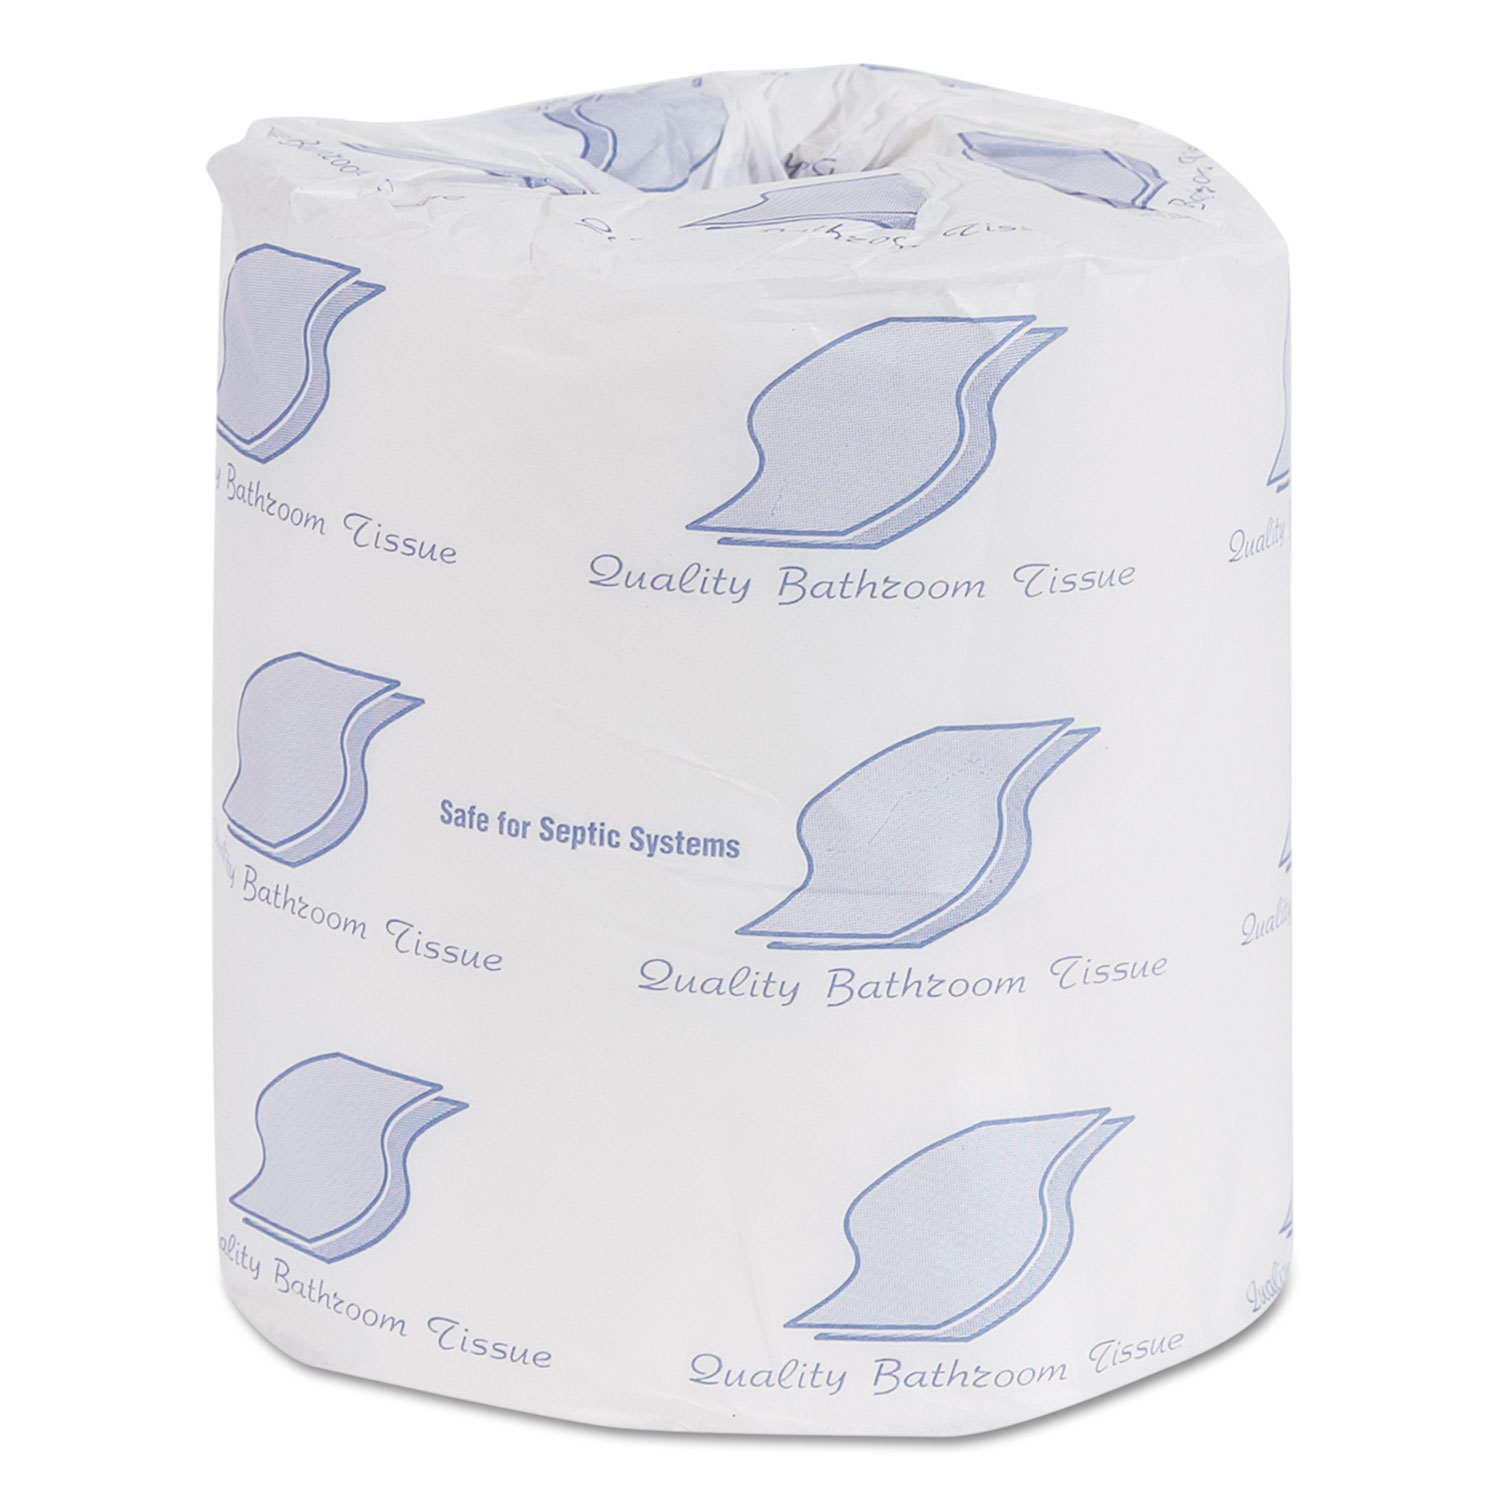  GEN GN999 Bath Tissue, Wrapped, Septic Safe, 2-Ply, White, 300 Sheets/Roll, 96 Rolls/Carton (GEN999B) 